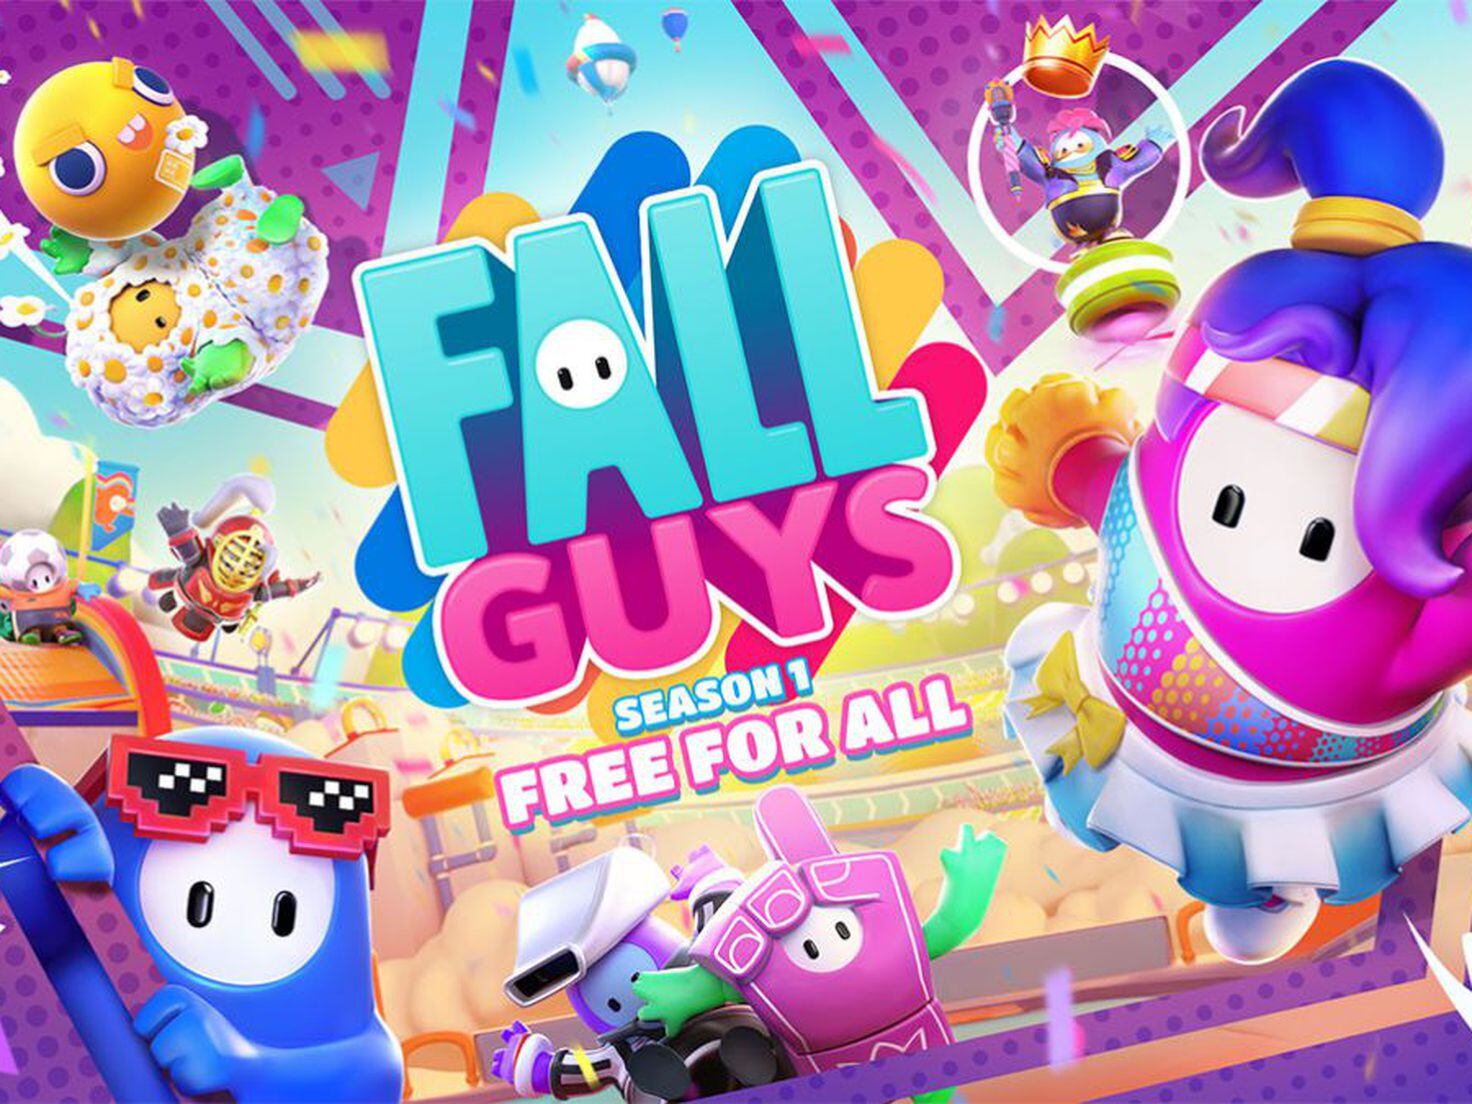 Fall Guys sells 2 million copies on Steam in under a week